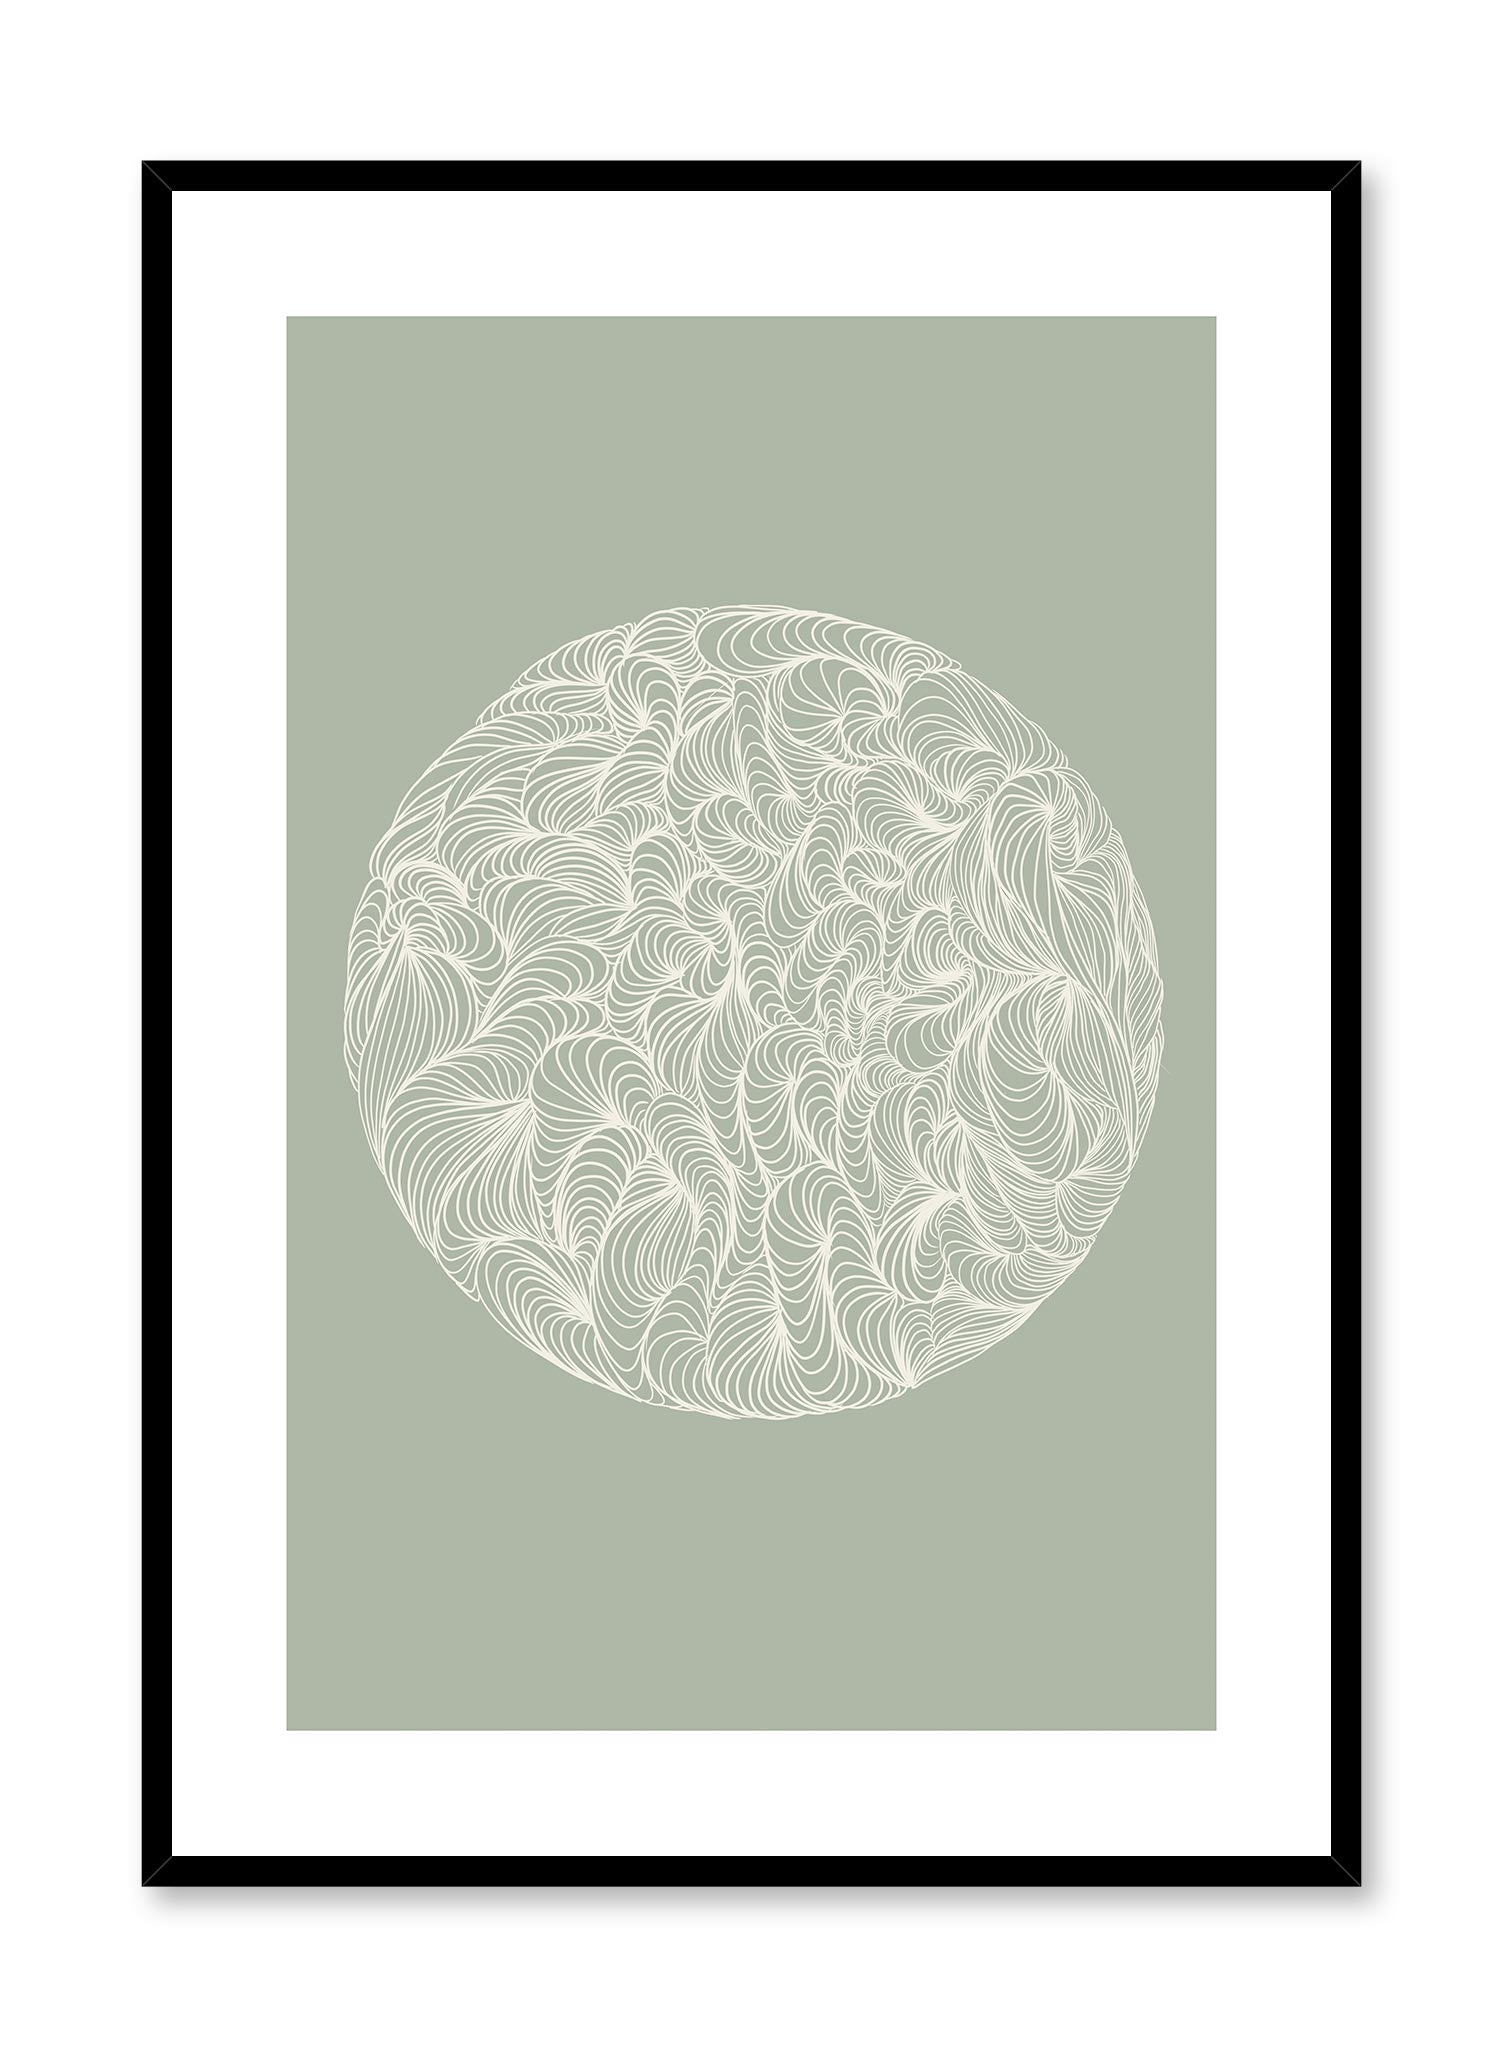 Nature Hypnosis is a minimalist illustration by Opposite Wall of a round ball of a striped and curved line pattern.